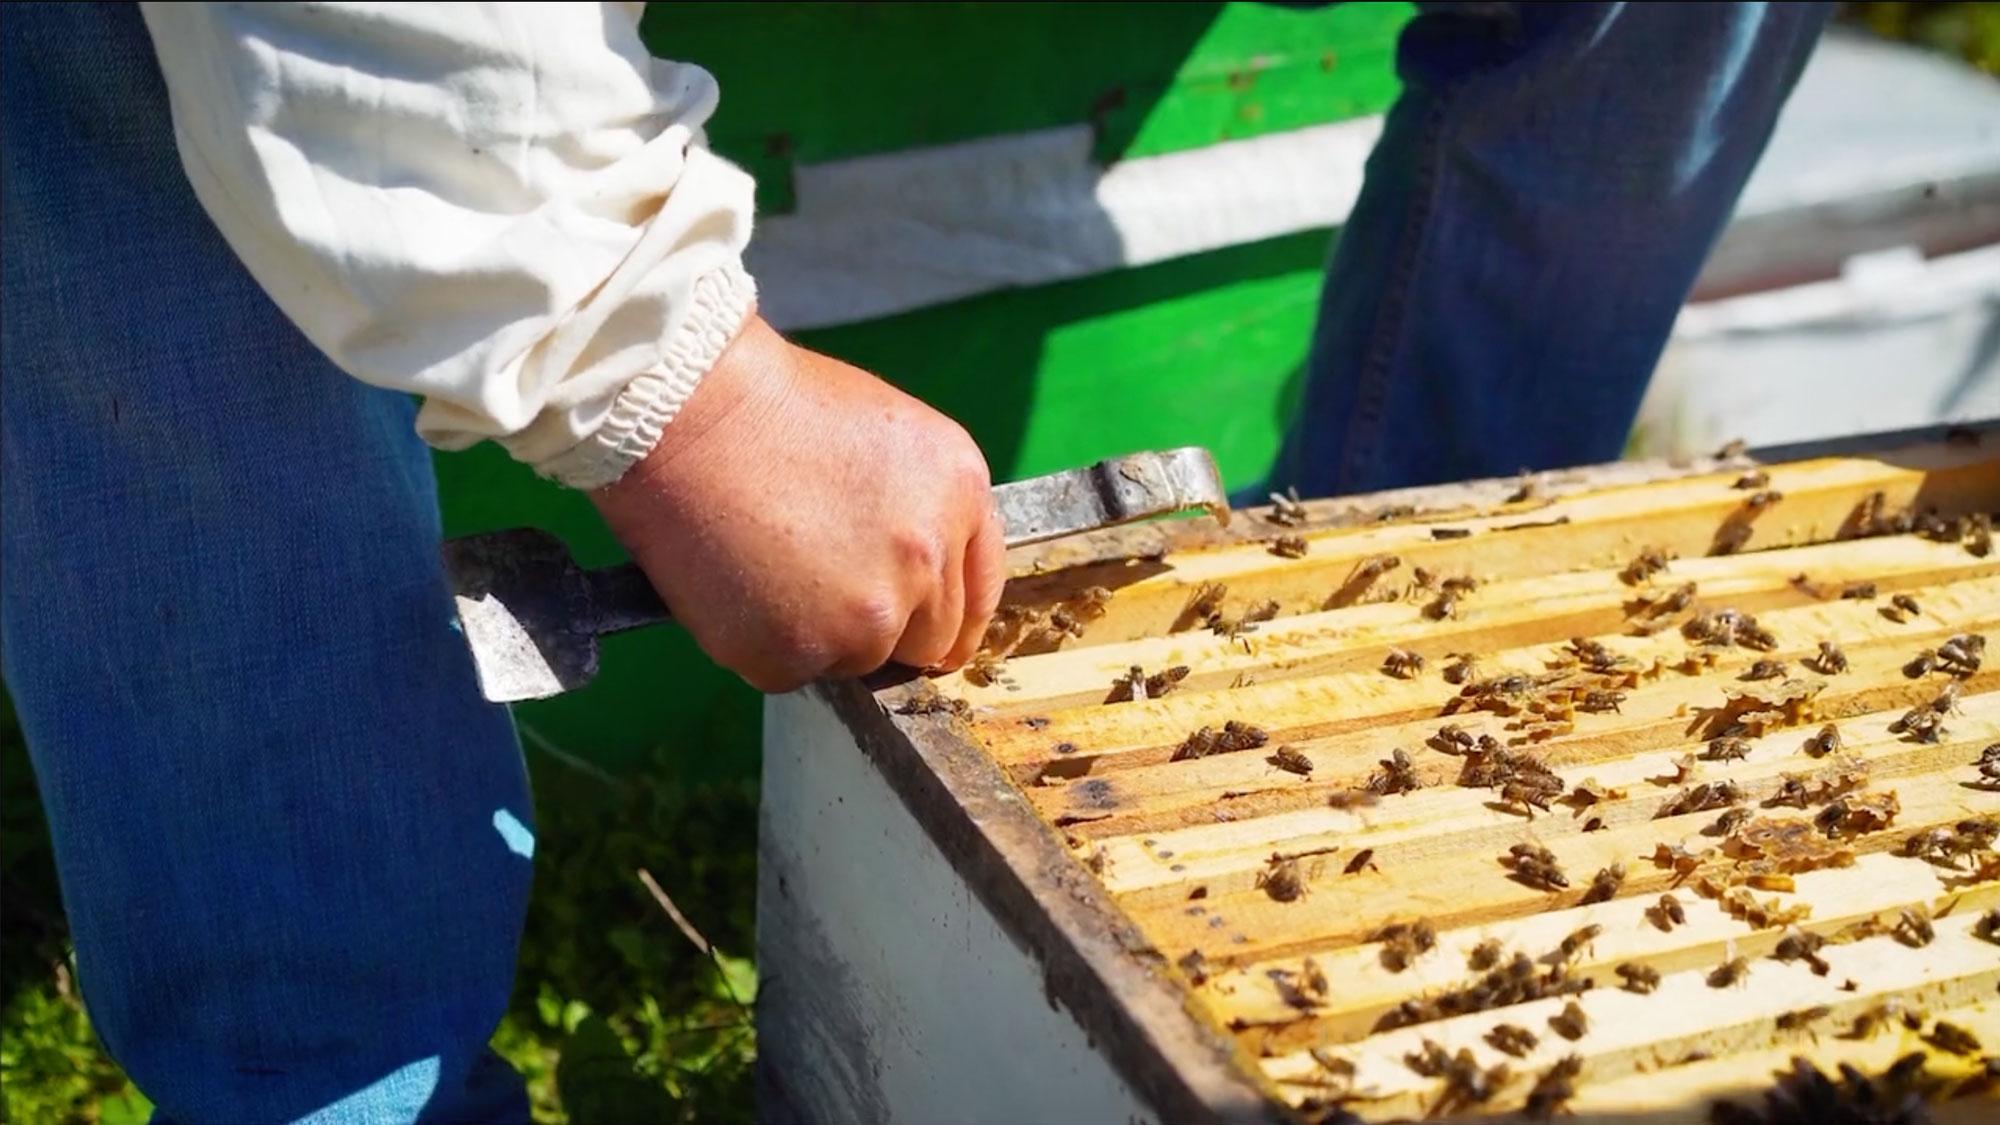 A person opens a beehive.